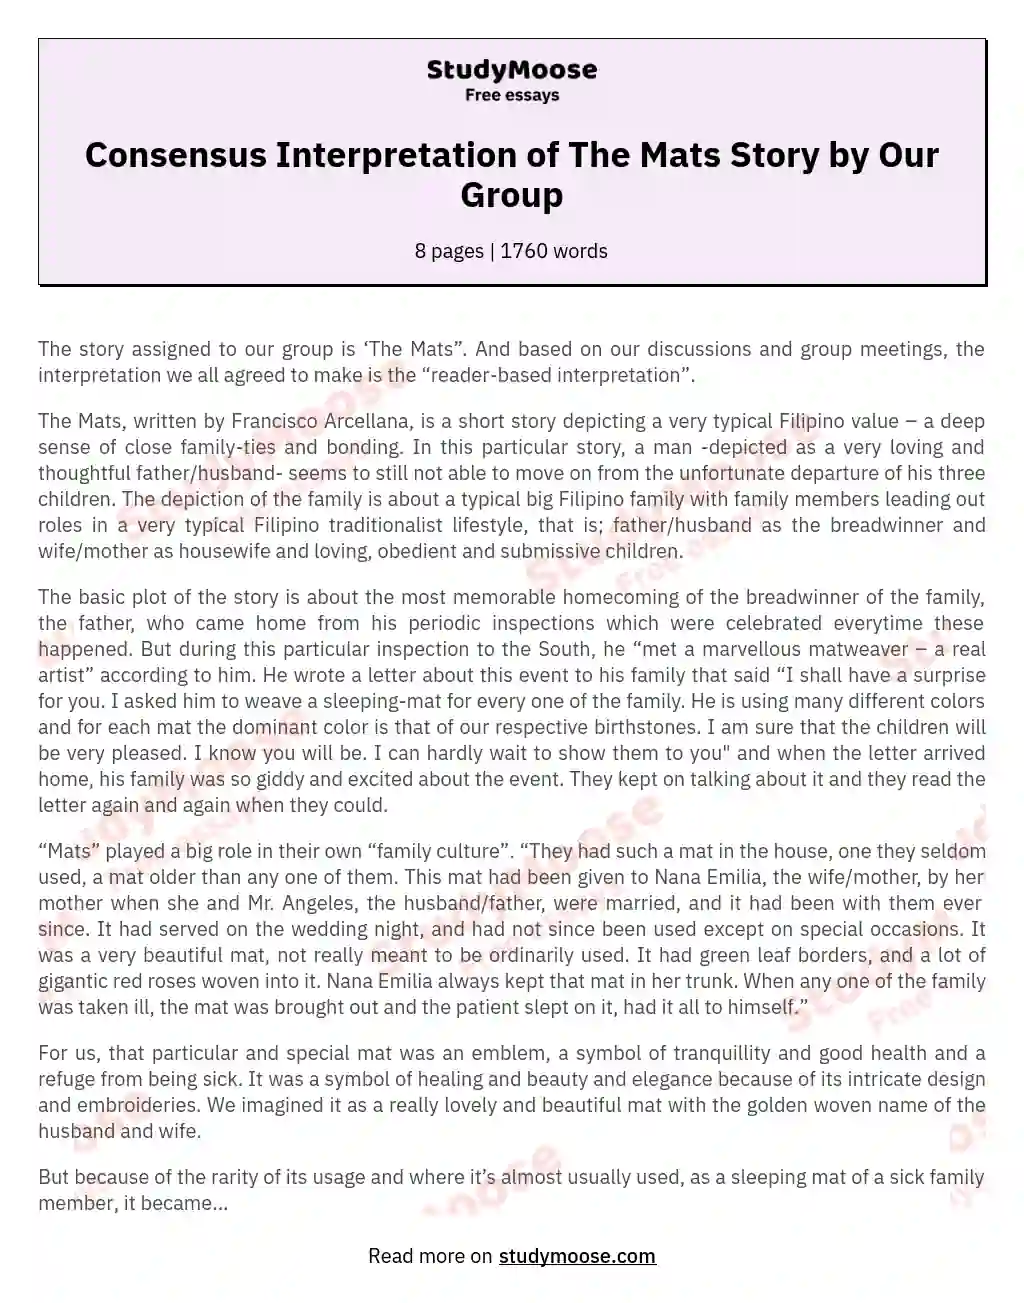 Consensus Interpretation of The Mats Story by Our Group essay